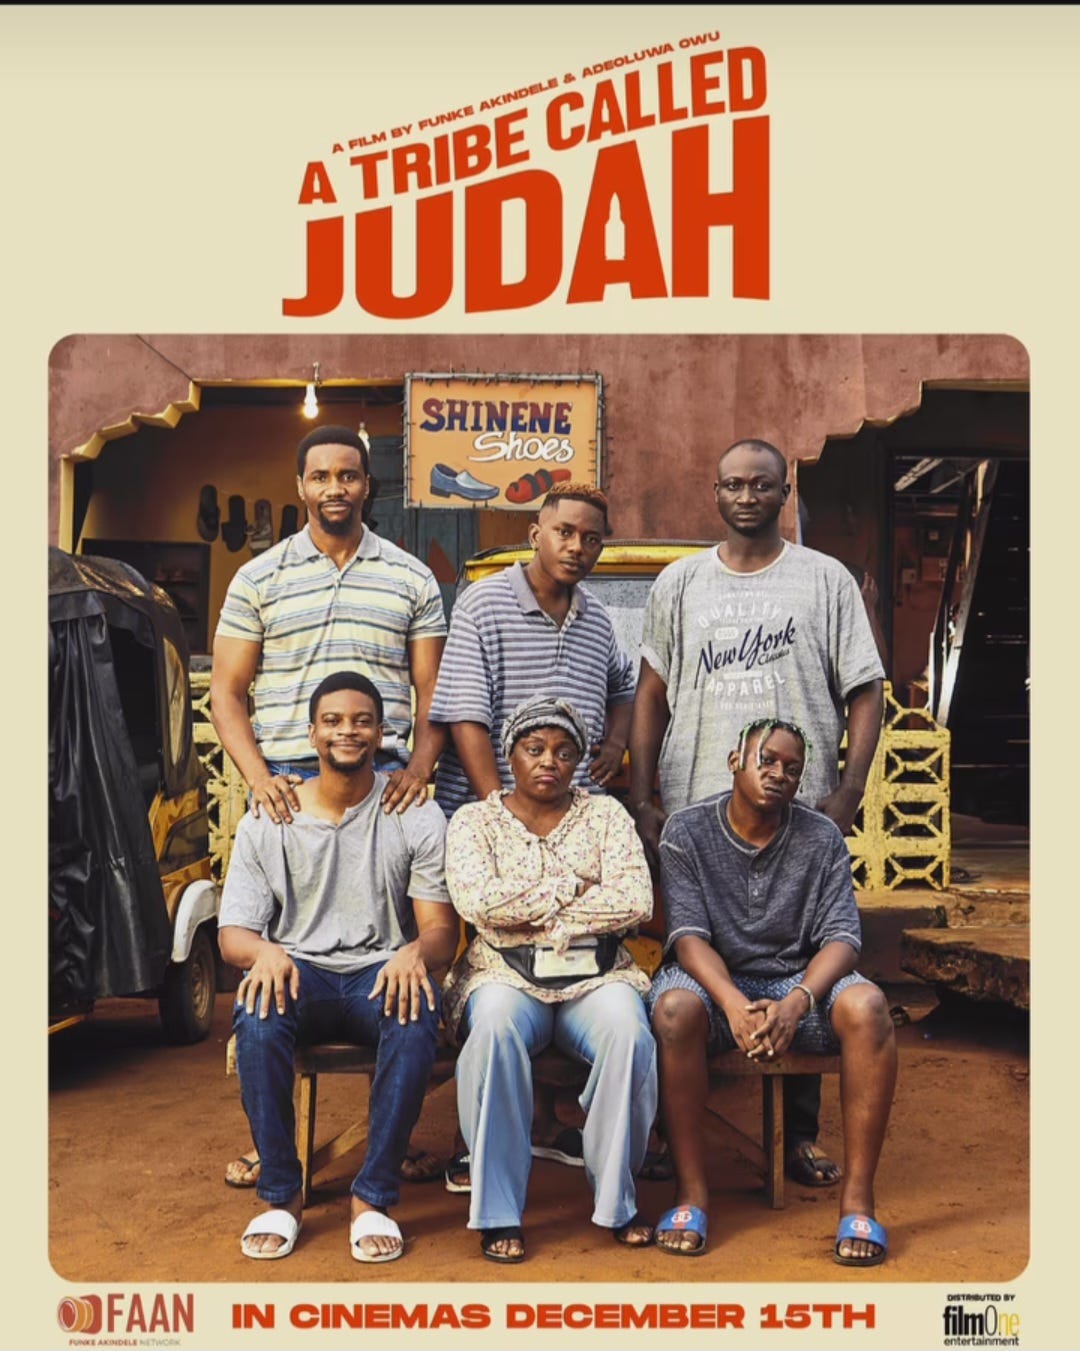 A Tribe Called Judah poster